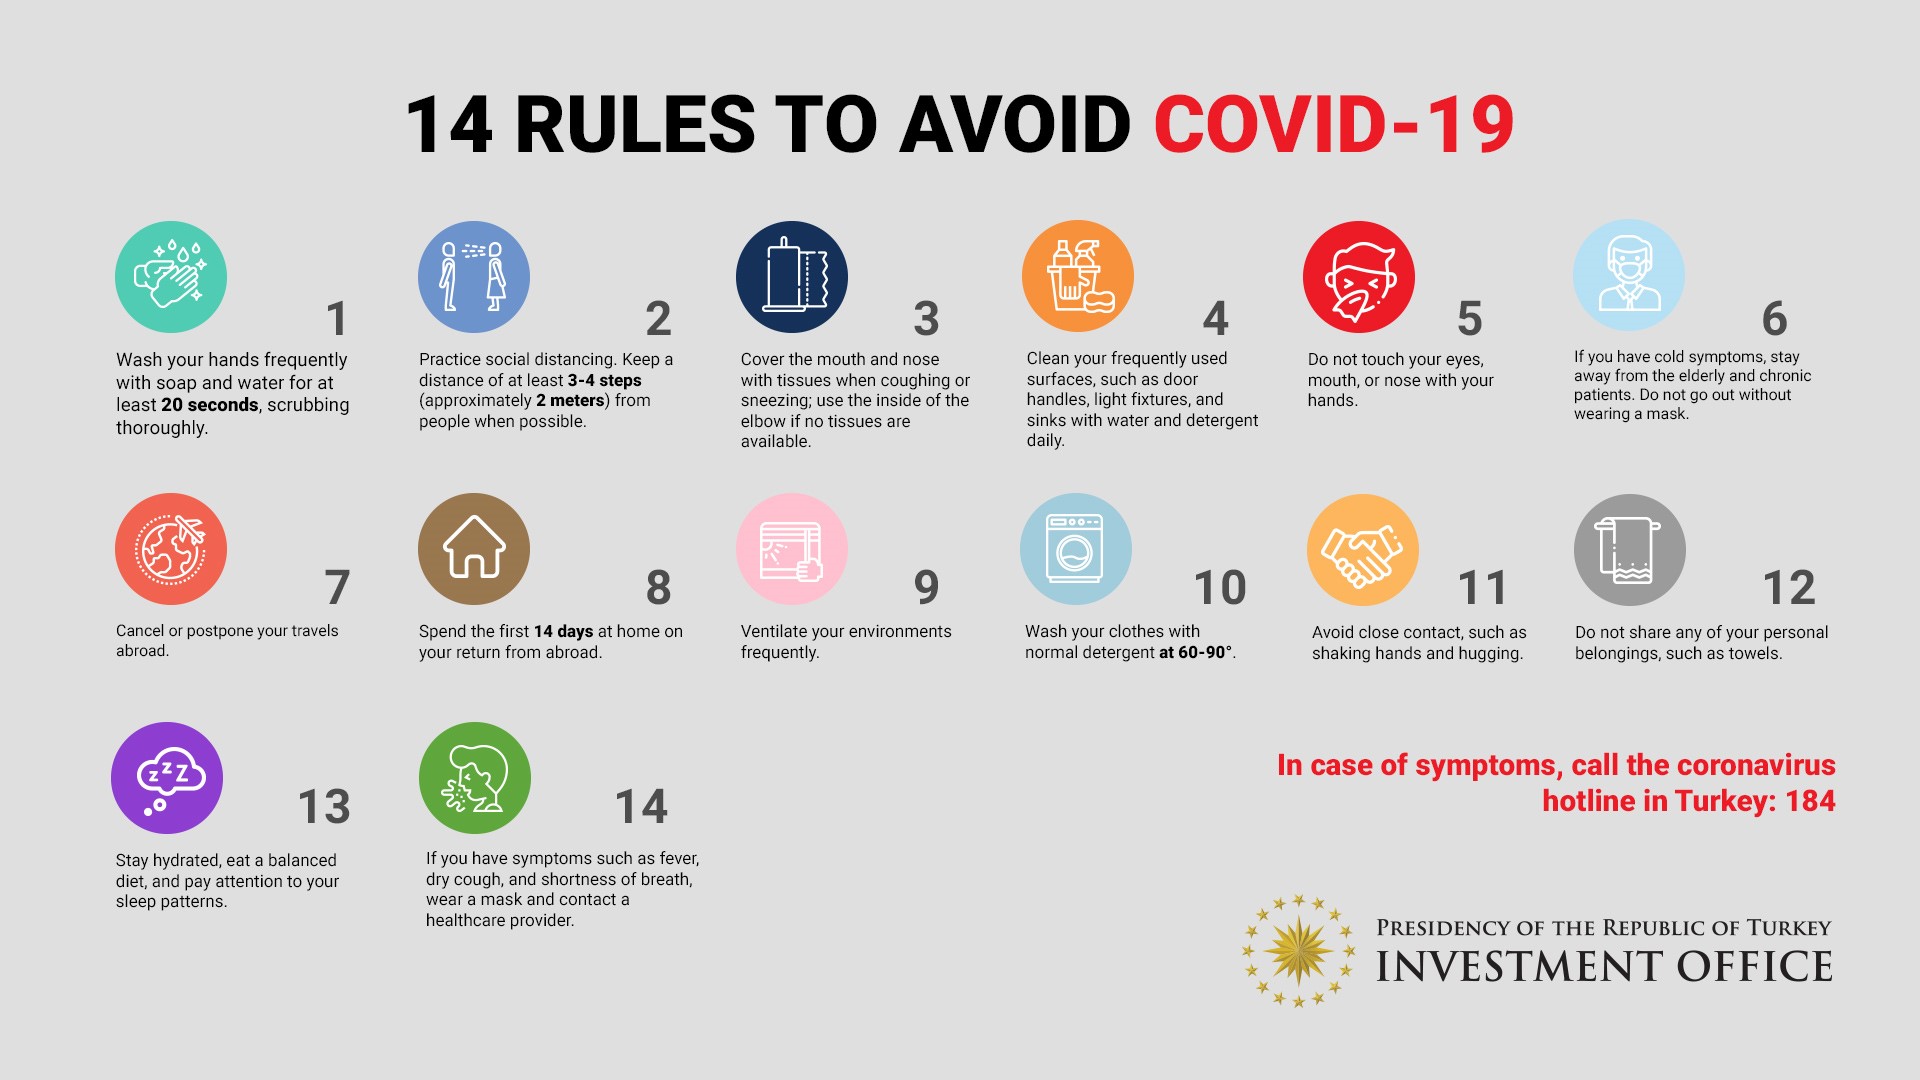 Image of 14 Rules to Avoid COVID-19